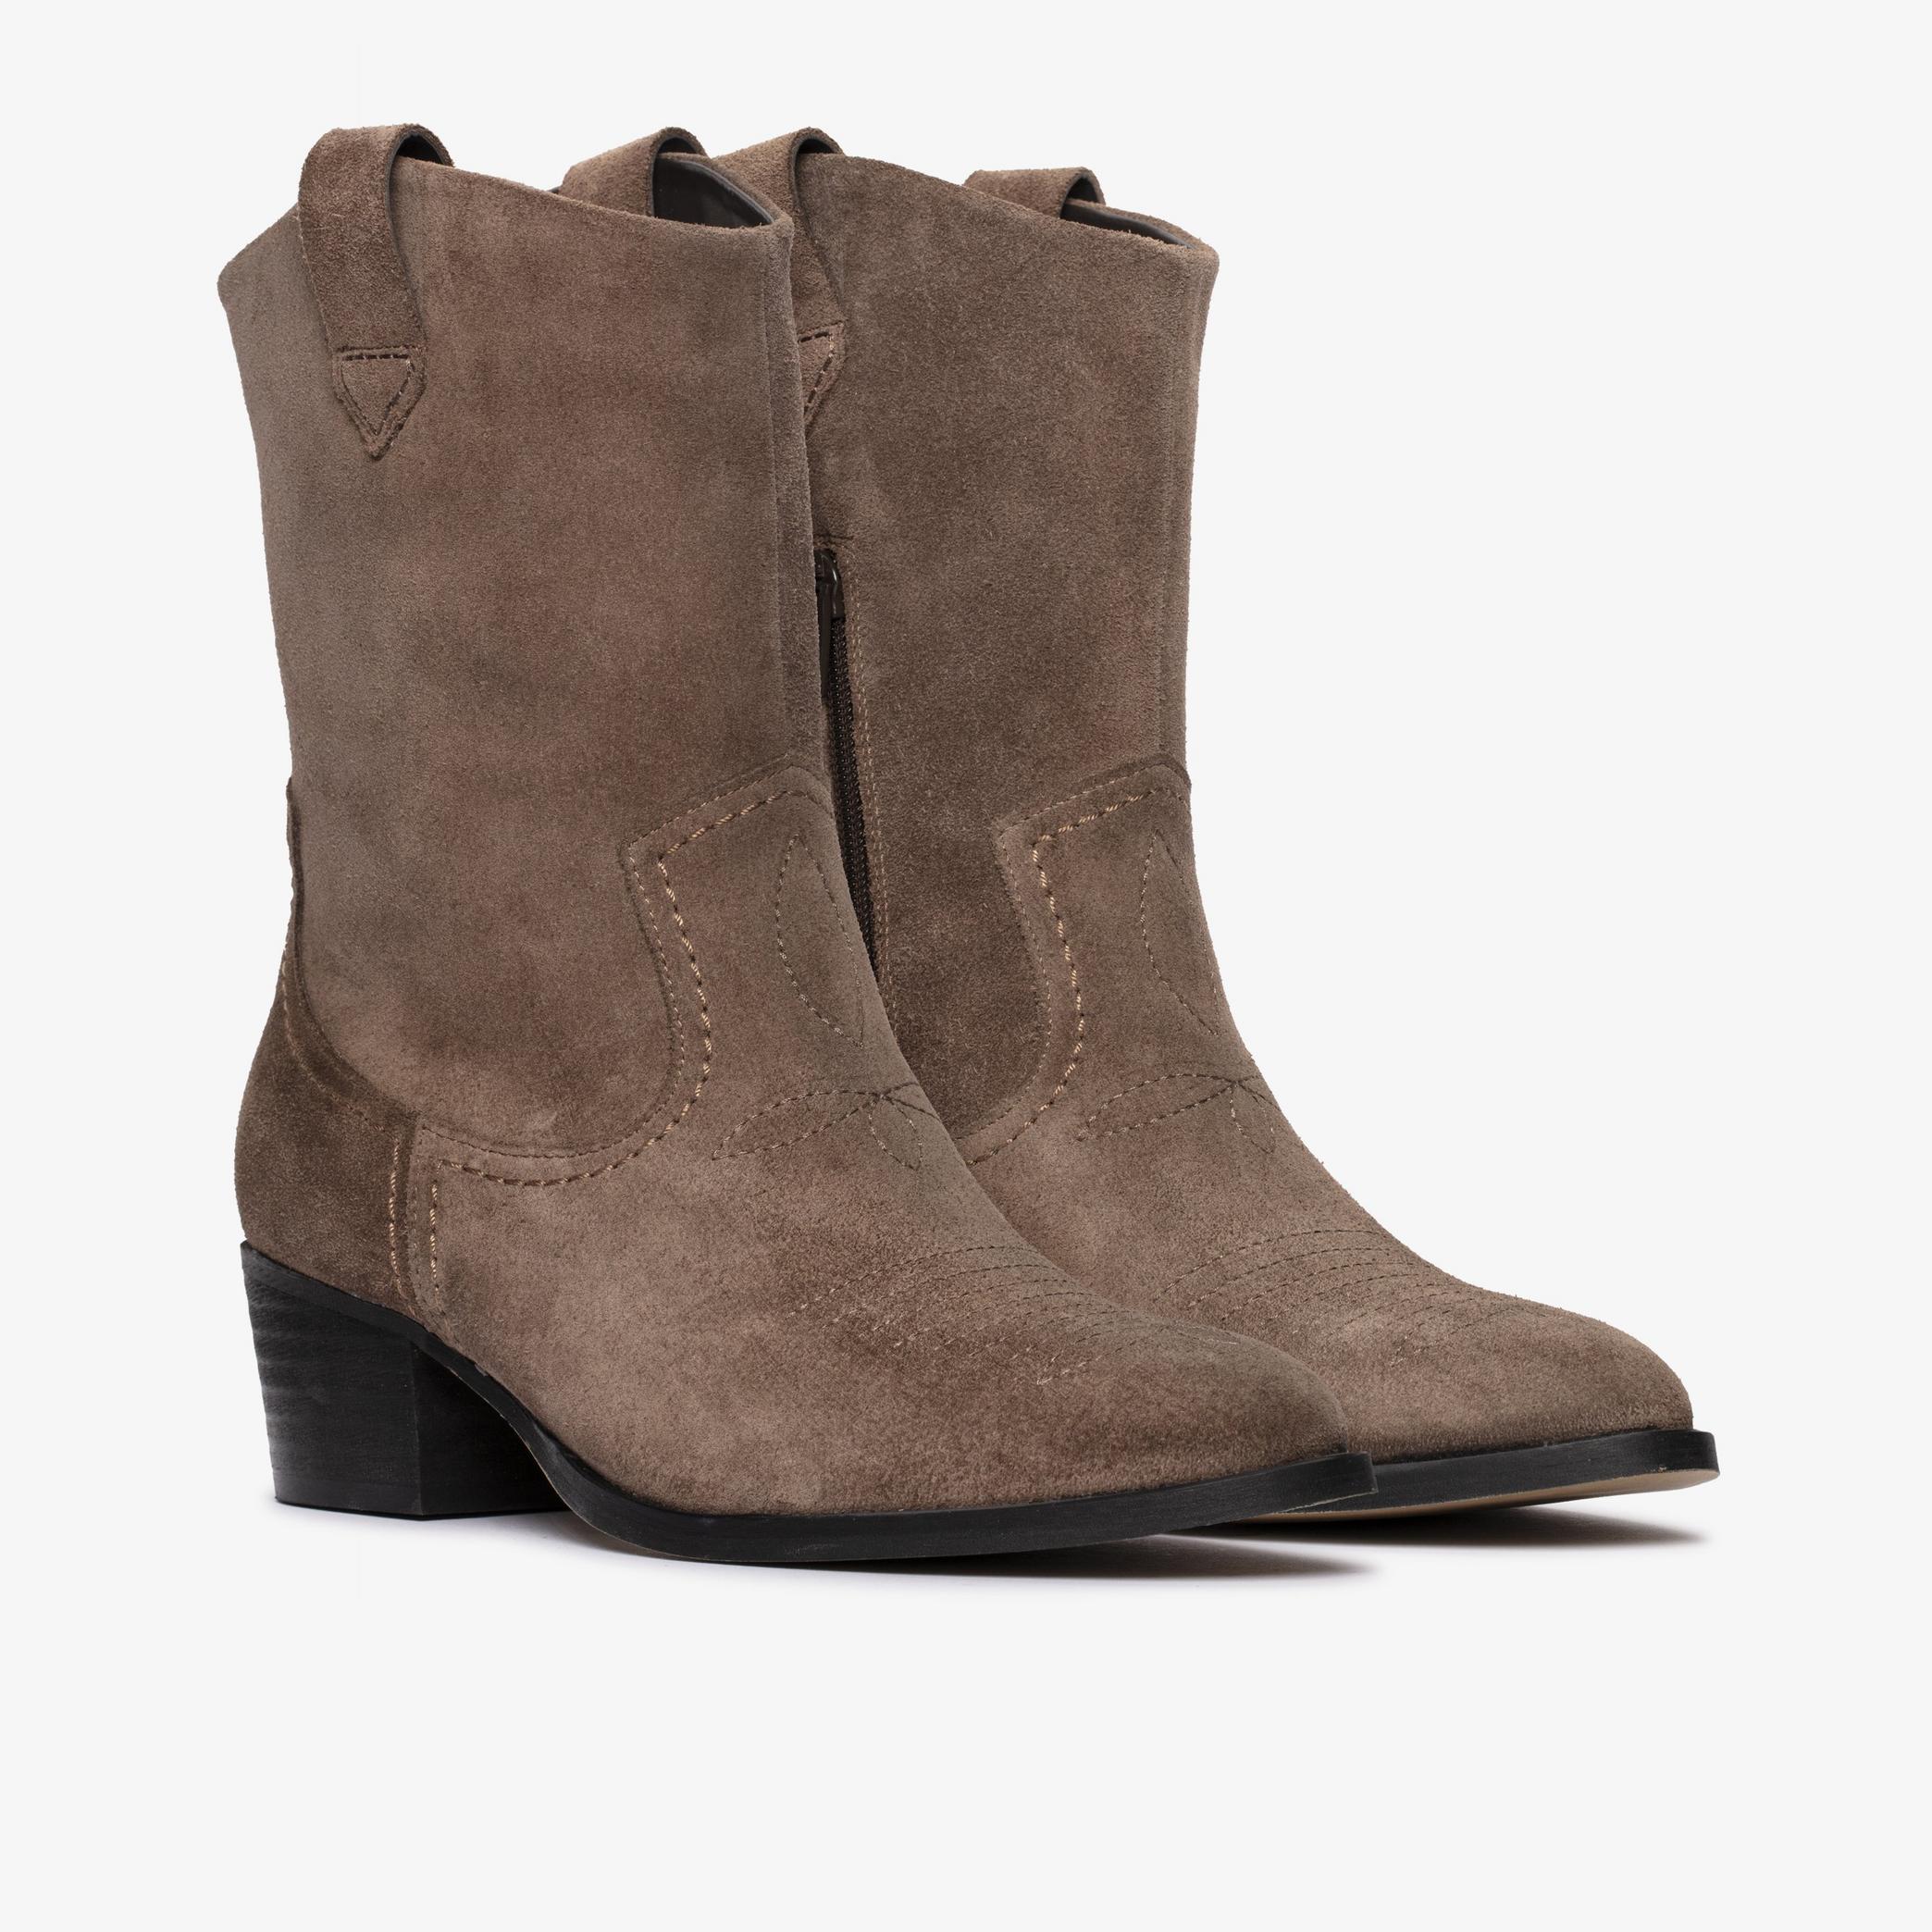 Octavia Up Taupe Suede Mid Calf Boots, view 4 of 6